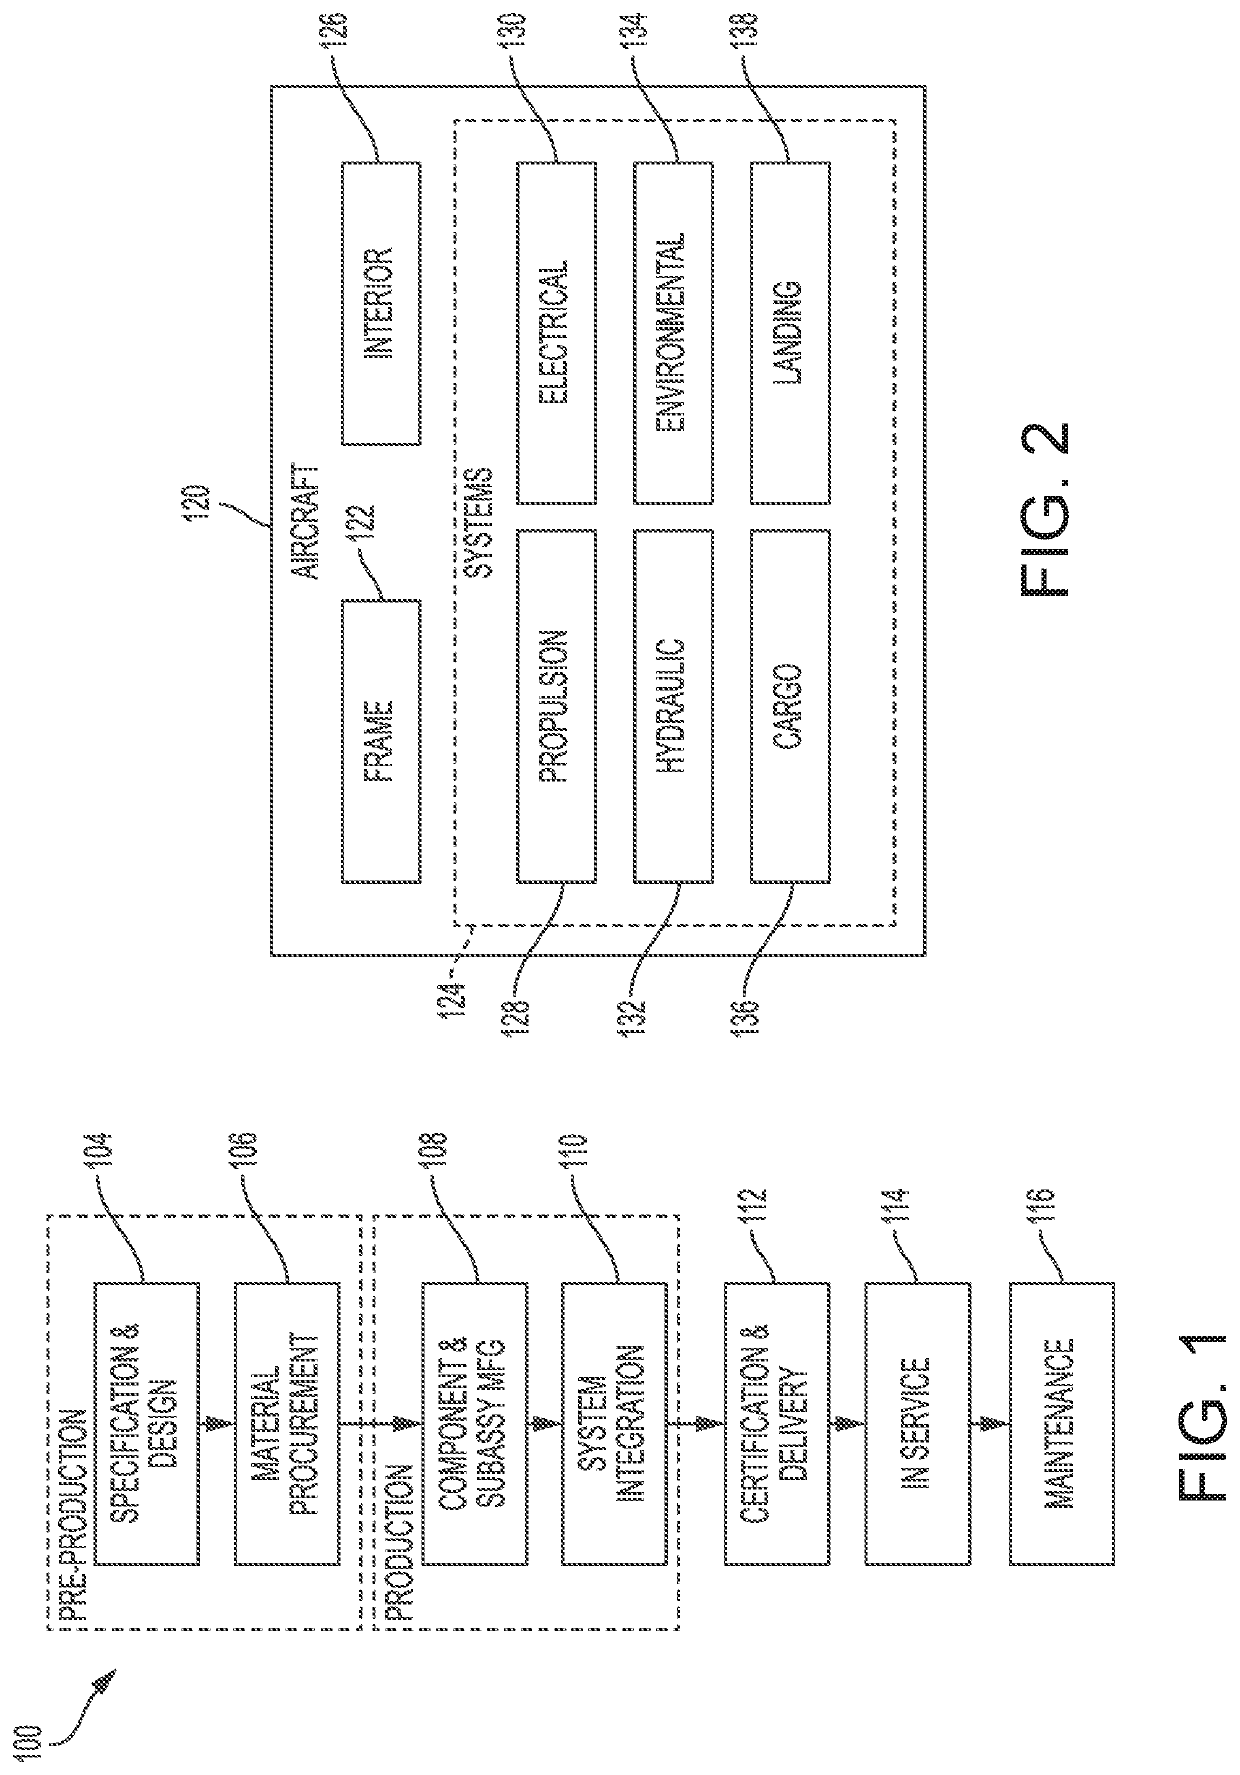 Heat-generating tooling systems and methods